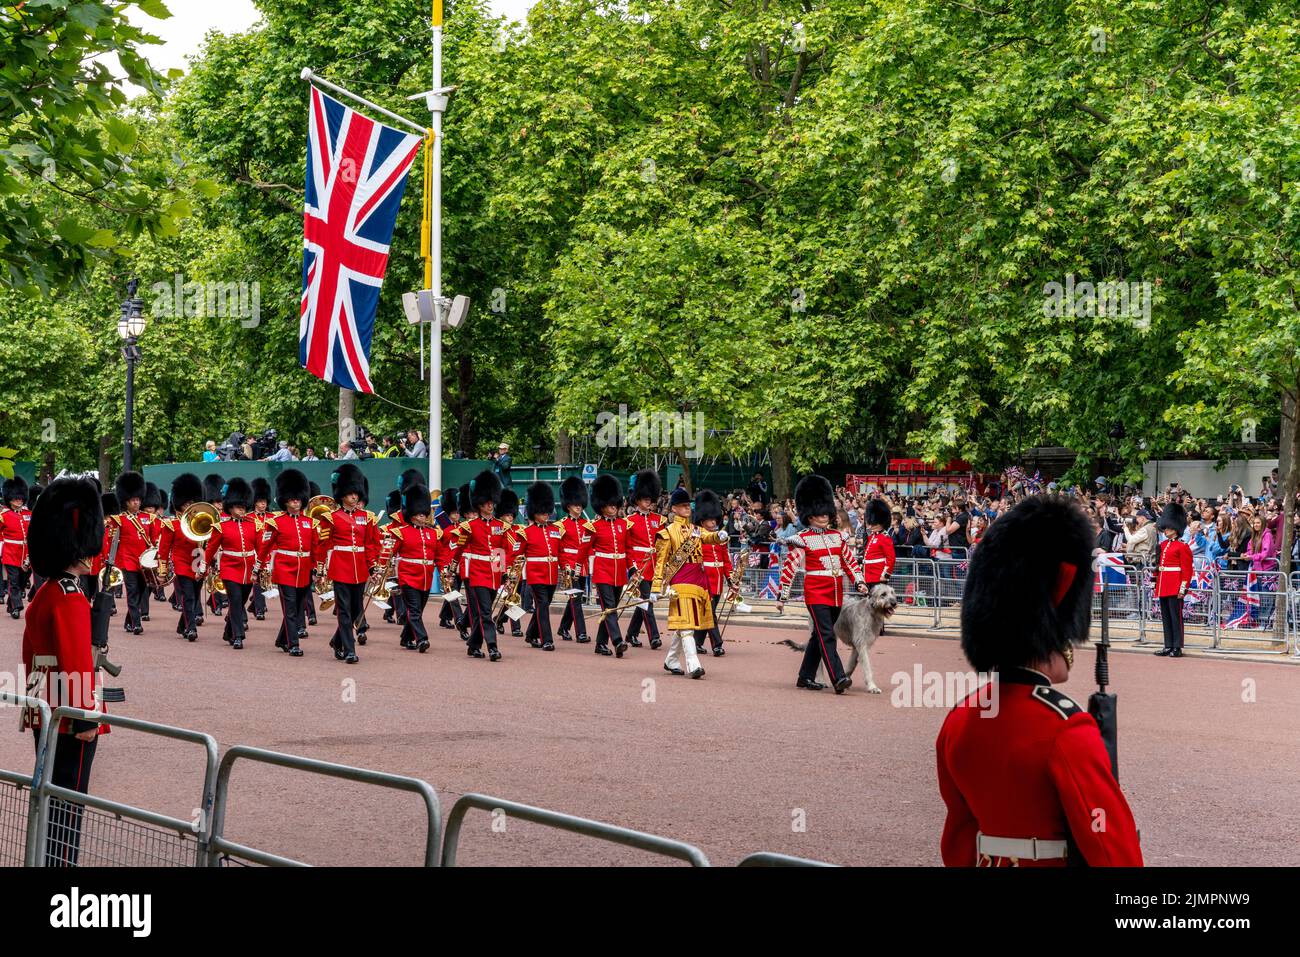 The First Battalion Irish Guards Together With 'Seamus' Their Irish Wolfhound Mascot Take Part In The Queen's Birthday Parade, London, UK. Stock Photo